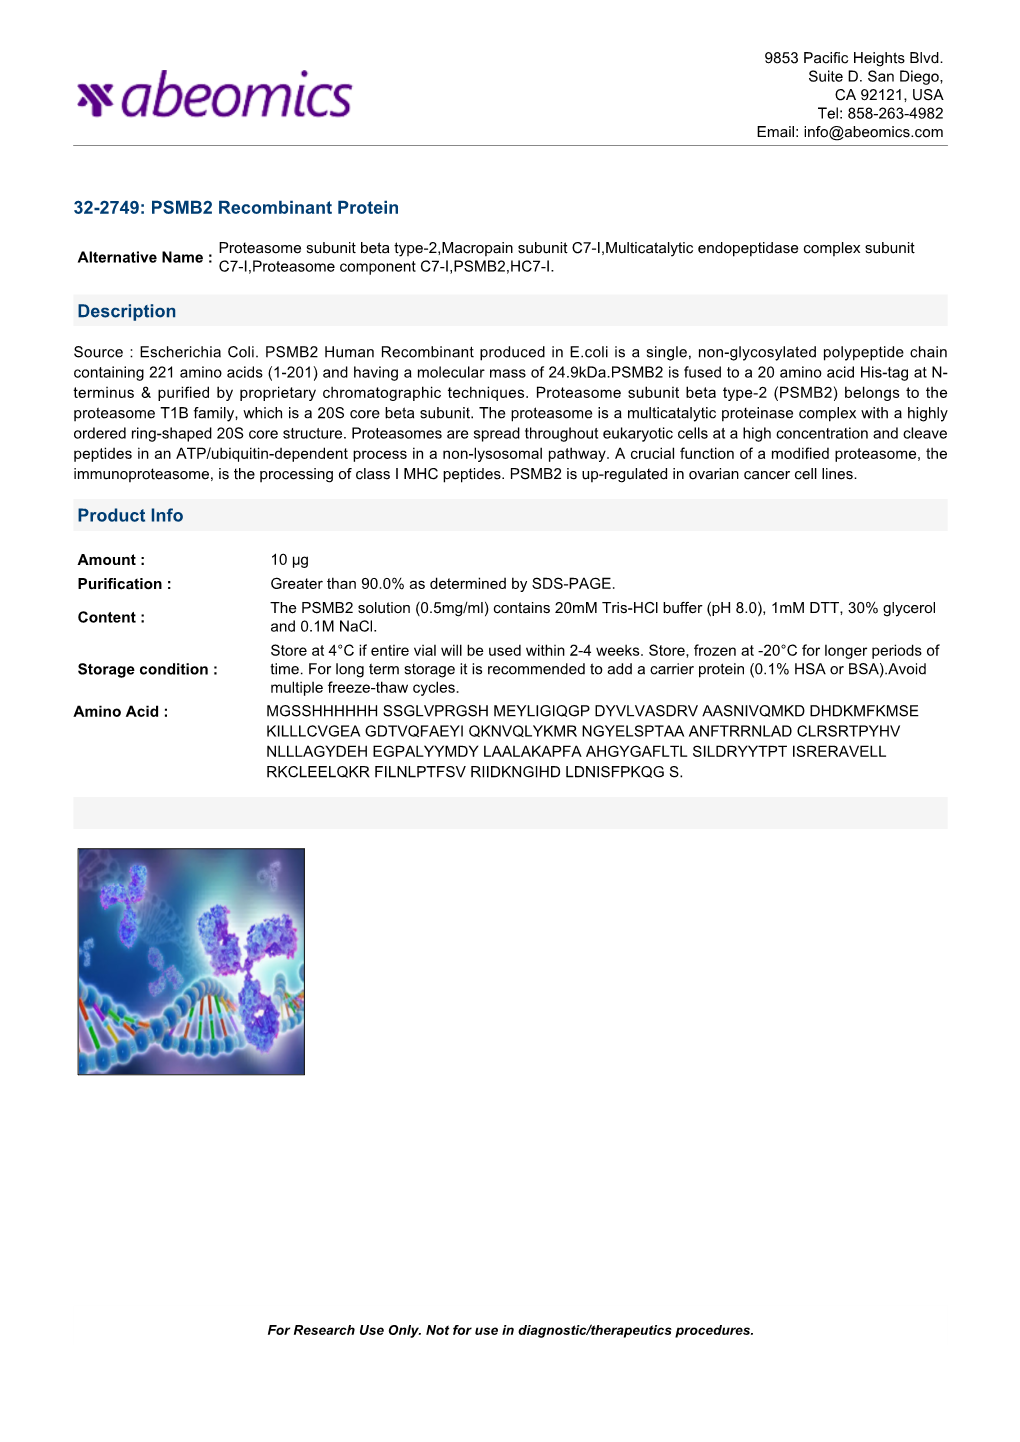 32-2749: PSMB2 Recombinant Protein Description Product Info